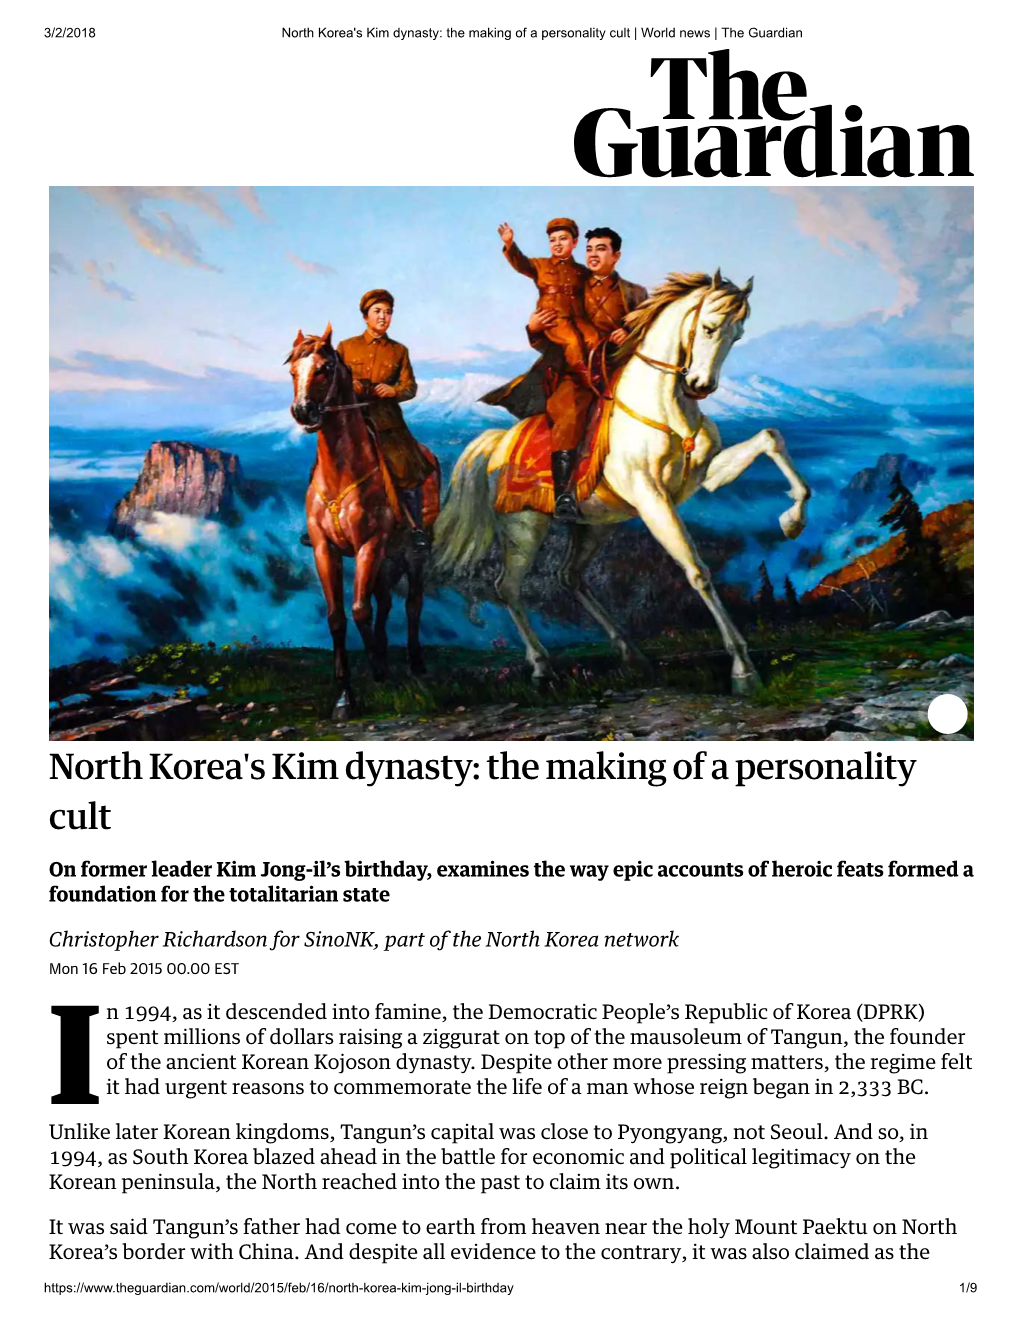 North Korea's Kim Dynasty: the Making of a Personality Cult | World News | the Guardian